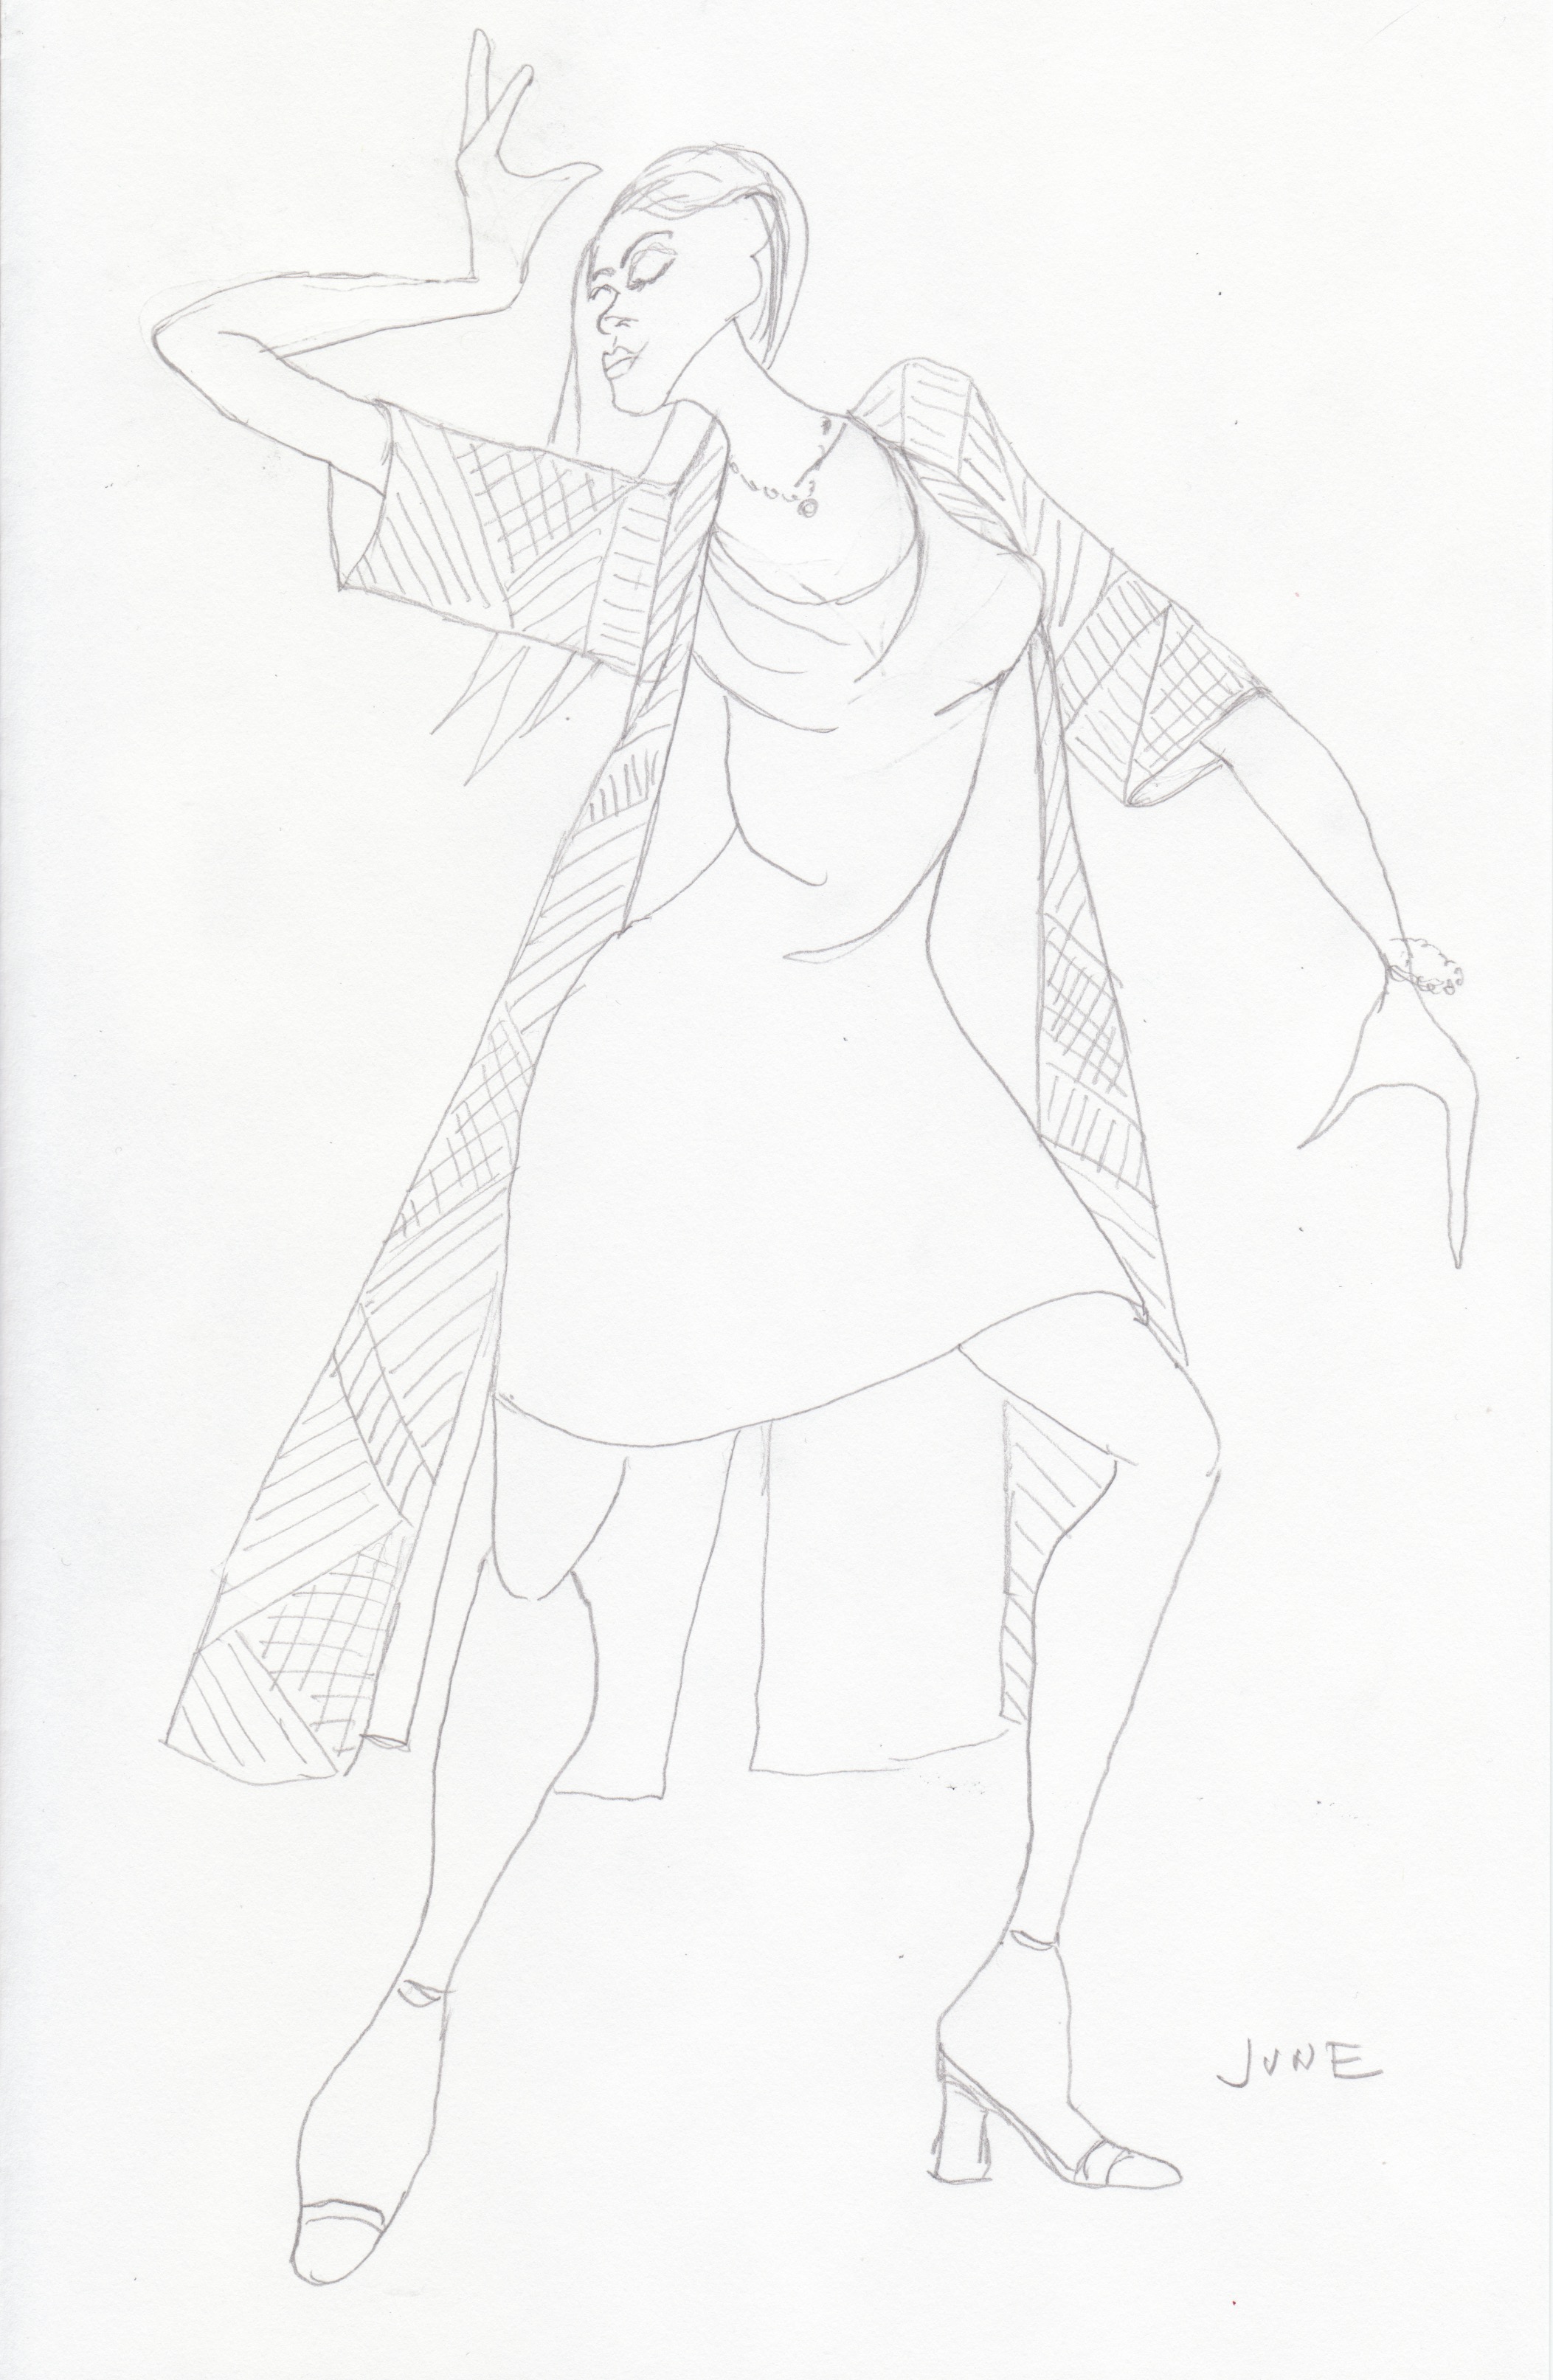 Costume sketch for June by Loyce Arthur.